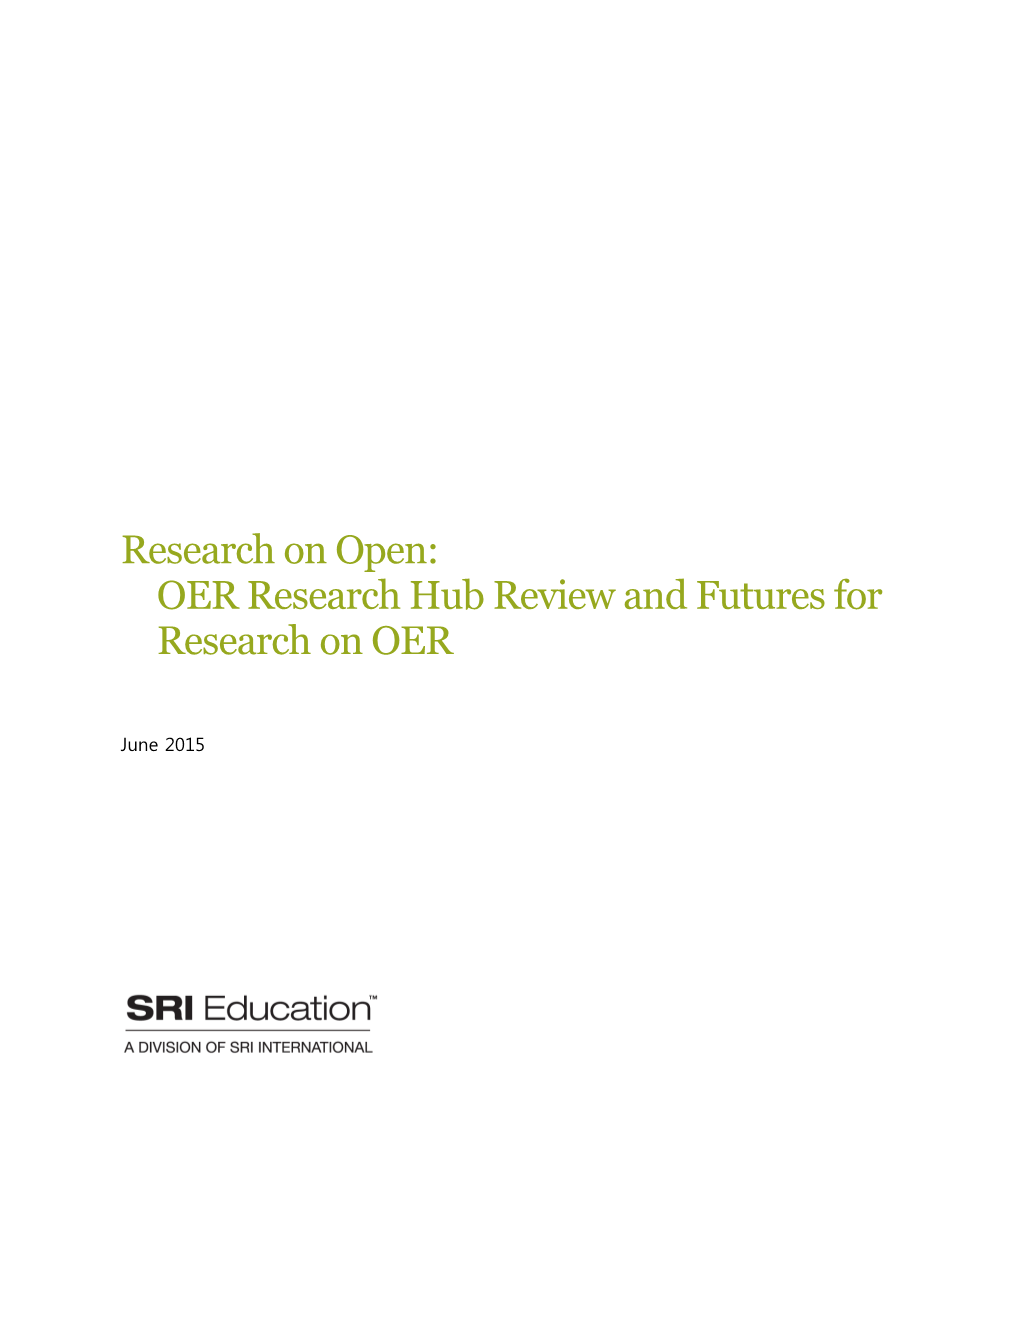 Research on Open:OER Research Hub Review and Futures for Research on OER